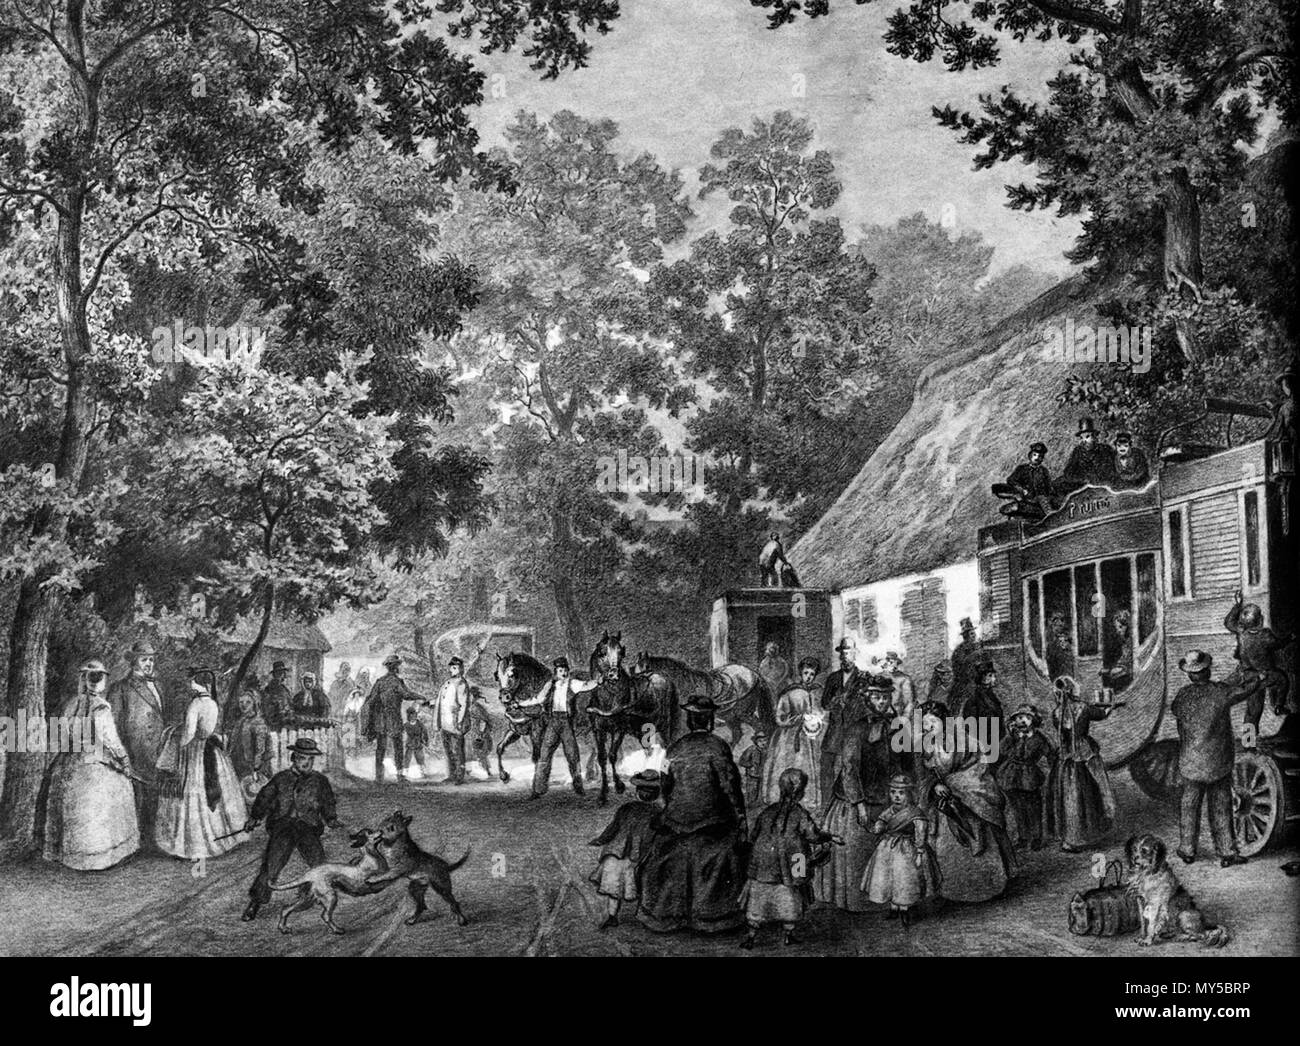 . English: The mail coach in Bremen-Oberneuland, Germany, at the Oberneulander Landstraße in front of the tavern Boschen (later Plate’s Café). Lithography by Johann Georg Walte (1811–1890) from the year 1860. Deutsch: Die Postkutsche in Bremen-Oberneuland an der Oberneulander Landstraße vor der Gaststätte Boschen (später Plate’s Café). Lithografie von Johann Georg Walte (1811–1890) aus dem Jahr 1860. 1860. Johann Georg Walte 435 Postkutsche in Oberneuland - Johann Georg Walte - 1860 Stock Photo